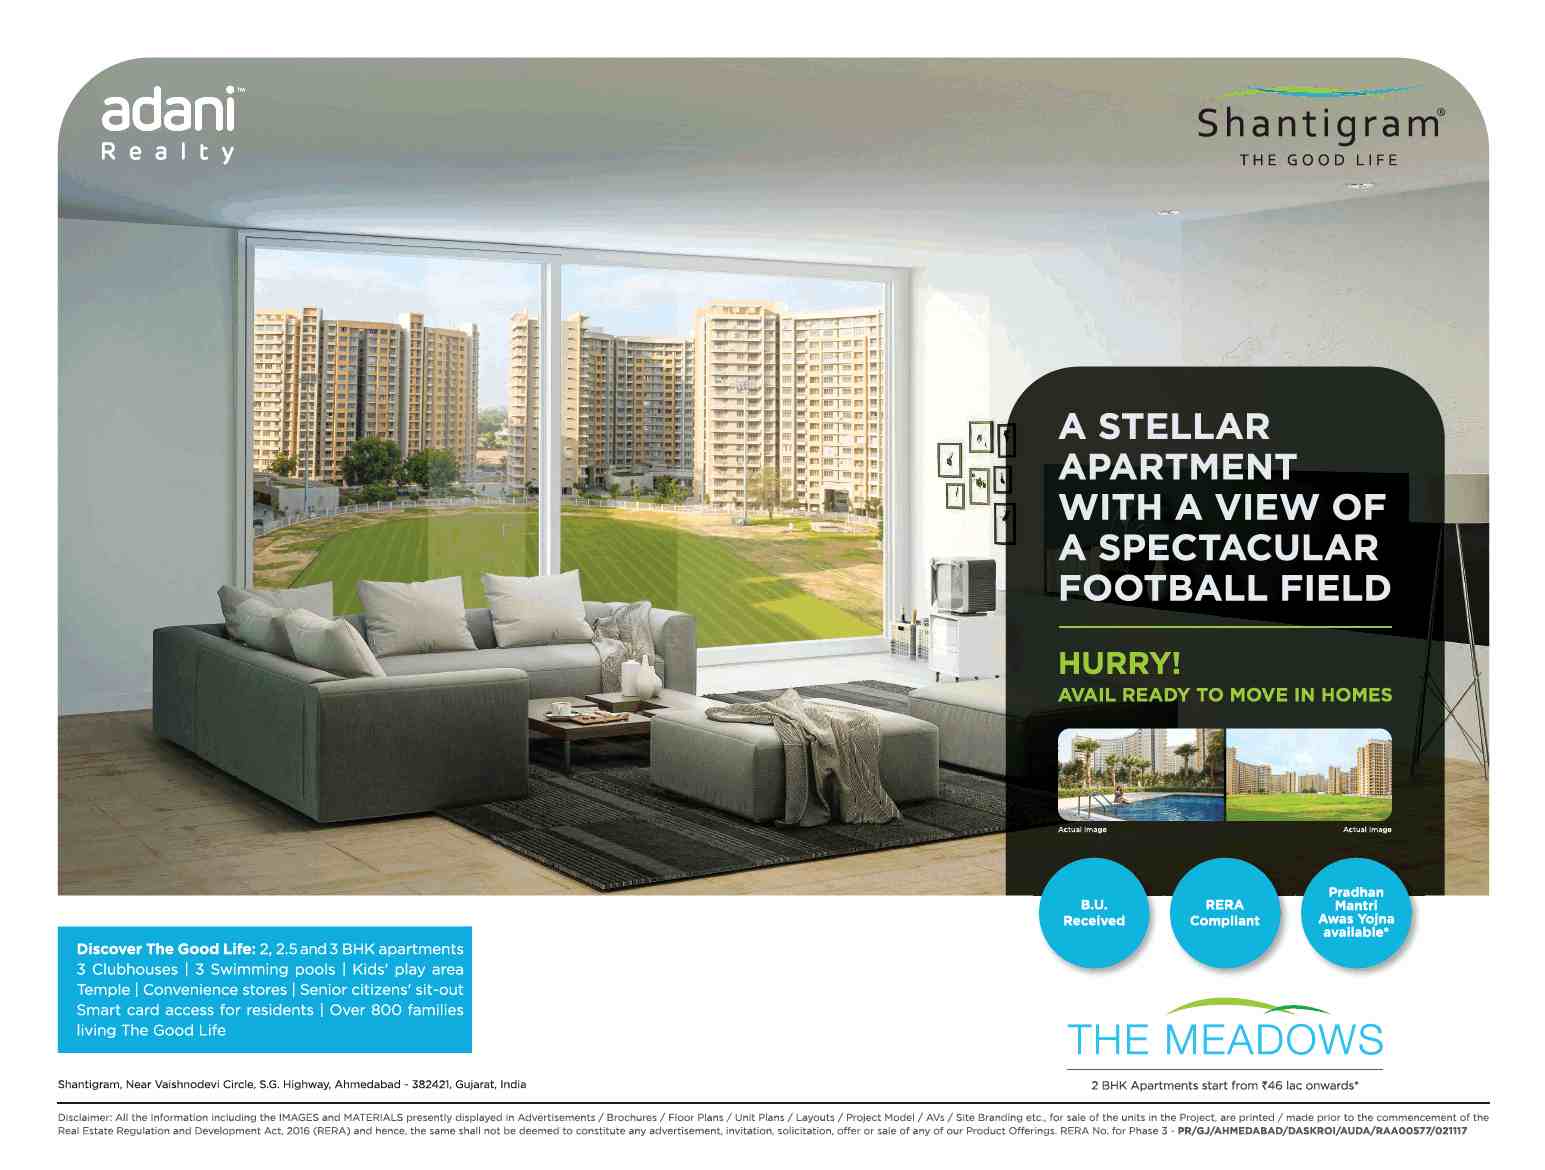 Get a view of spectacular football field by residing at Adani Shantigram Meadows in Ahmedabad Update